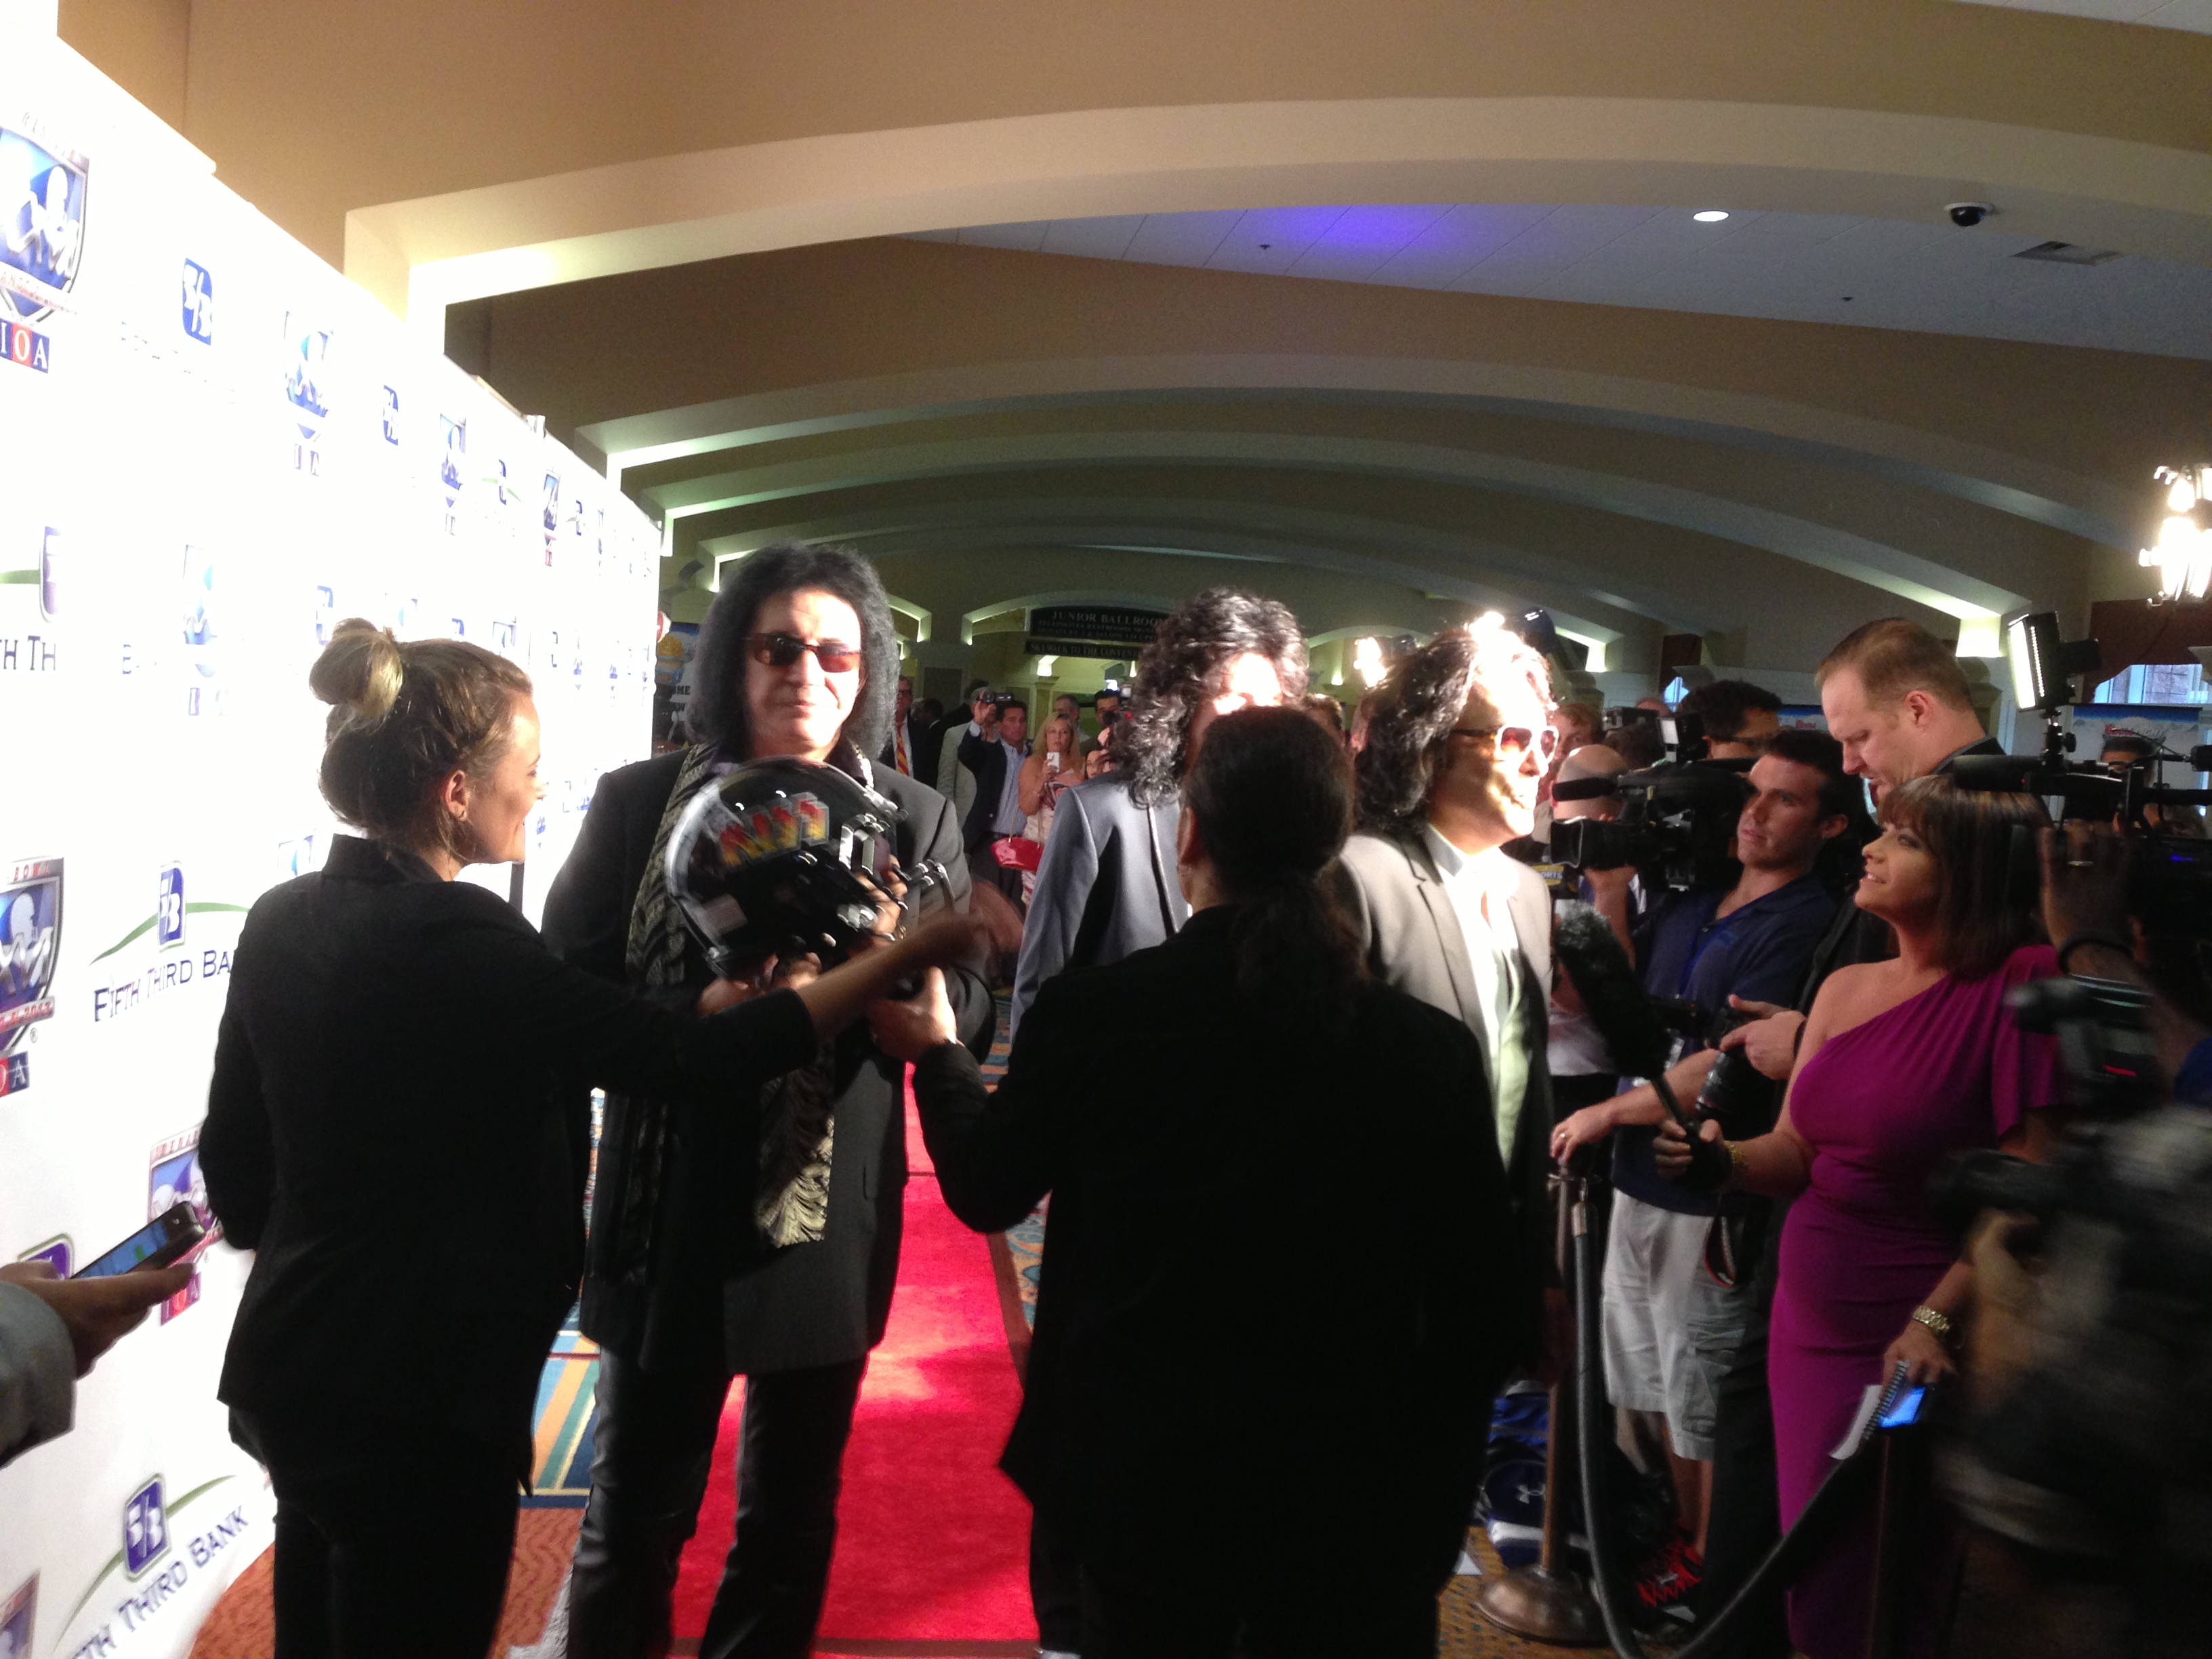 Gene Simmons and the rest of the of KISS on the red carpet at the 2013 AFL's Annual Awards Gala Ryan produced. KISS performed a 30 minute acoustic set at the Gala and Ryan went on to produce ArenaBowl XXVI and the KISS concert in Orlando that week.